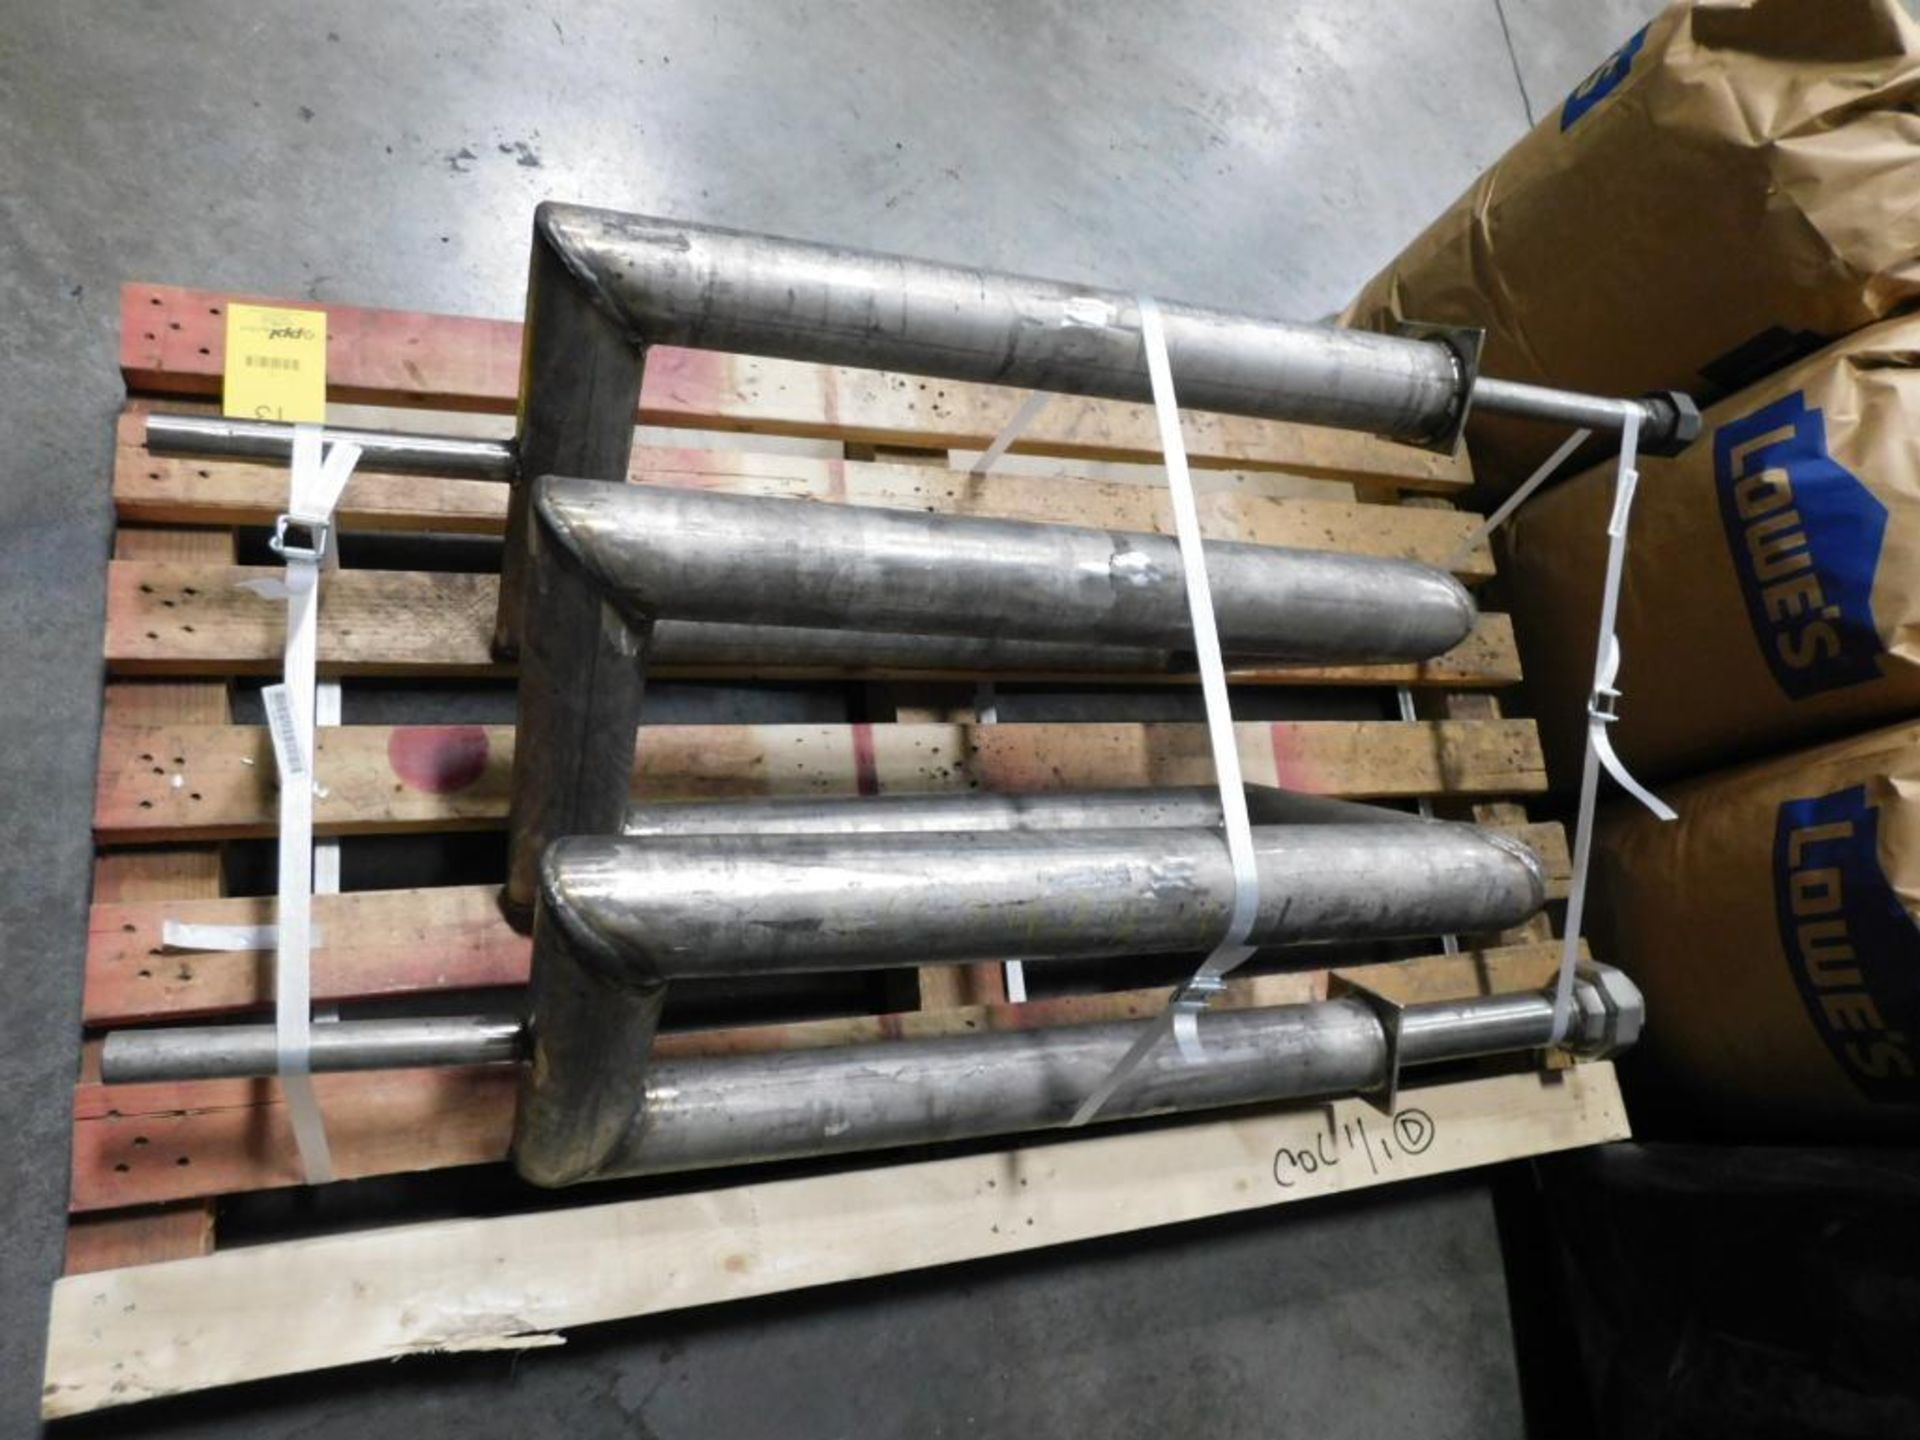 New Retort for CI Hayes Ammonia Dissociator described in Lot 12, Inconel Construction, Recently purc - Image 9 of 9